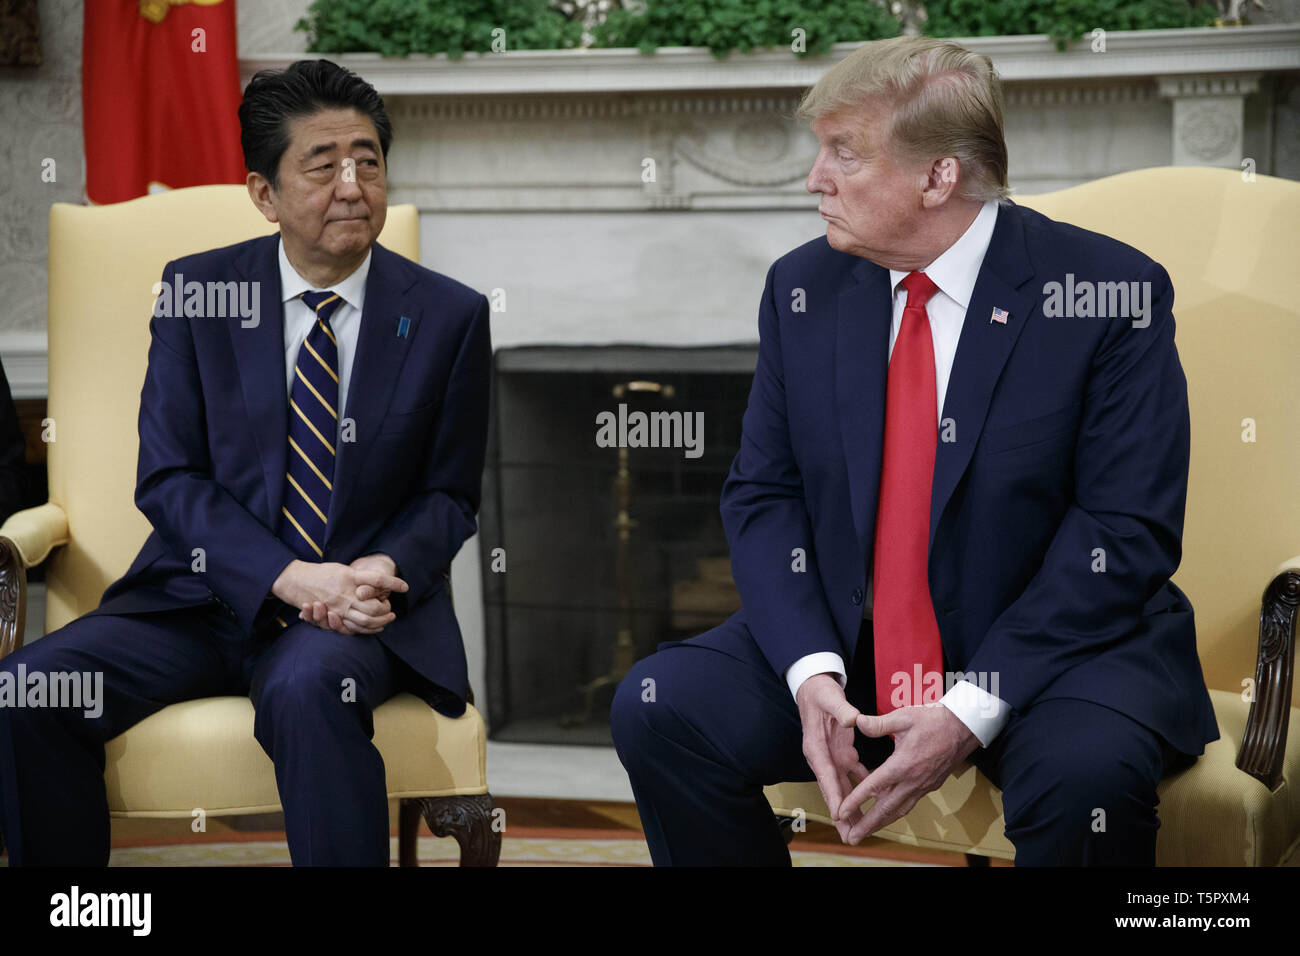 Washington, District of Columbia, USA. 26th Apr, 2019. US President Donald J. Trump meets with Japanese Prime Minister Shinzo Abe in the Oval Office of the White House in Washington, DC, USA, 26 April 2019. President Trump is hosting a dinner for Prime Minister Abe and his wife celebrating the First Lady's 49th birthday.Credit: Shawn Thew/Pool via CNP Credit: Shawn Thew/CNP/ZUMA Wire/Alamy Live News Stock Photo